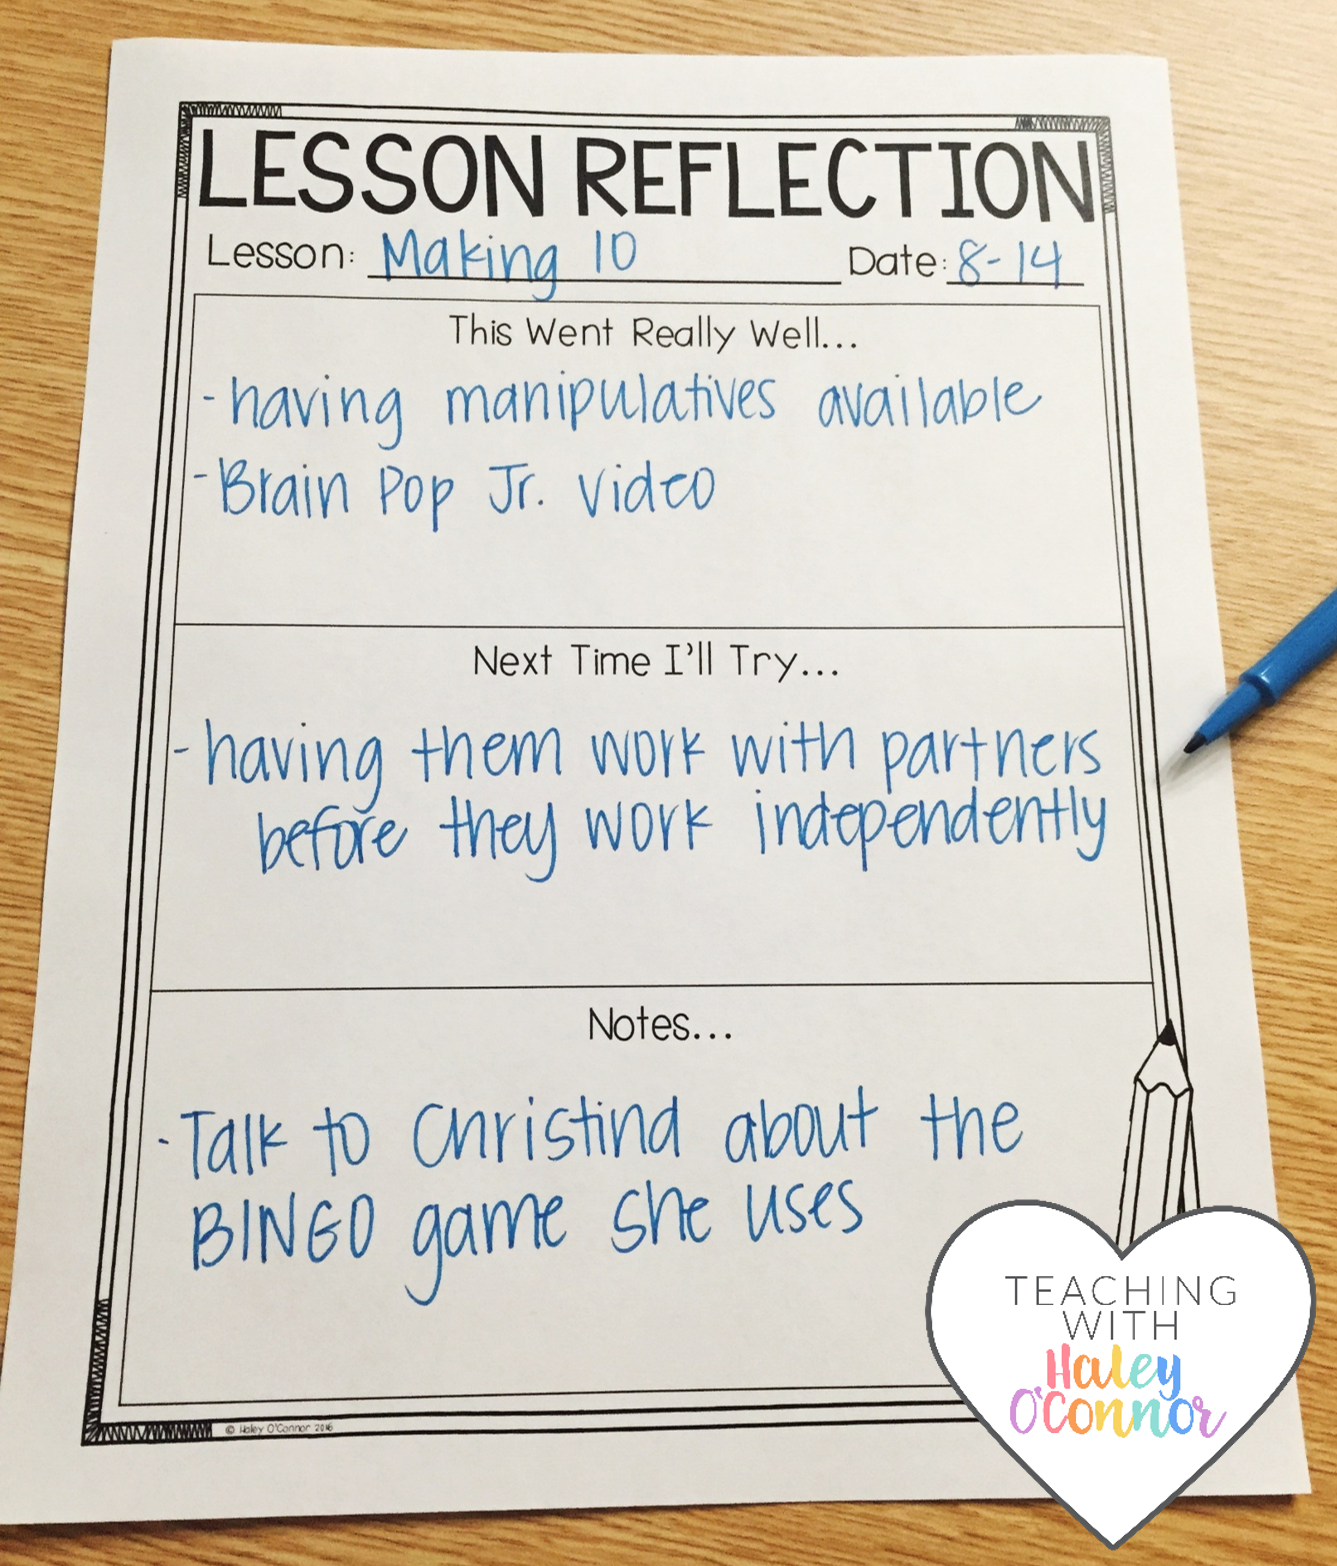 Lesson Reflection Page for Teachers by Haley OConnor